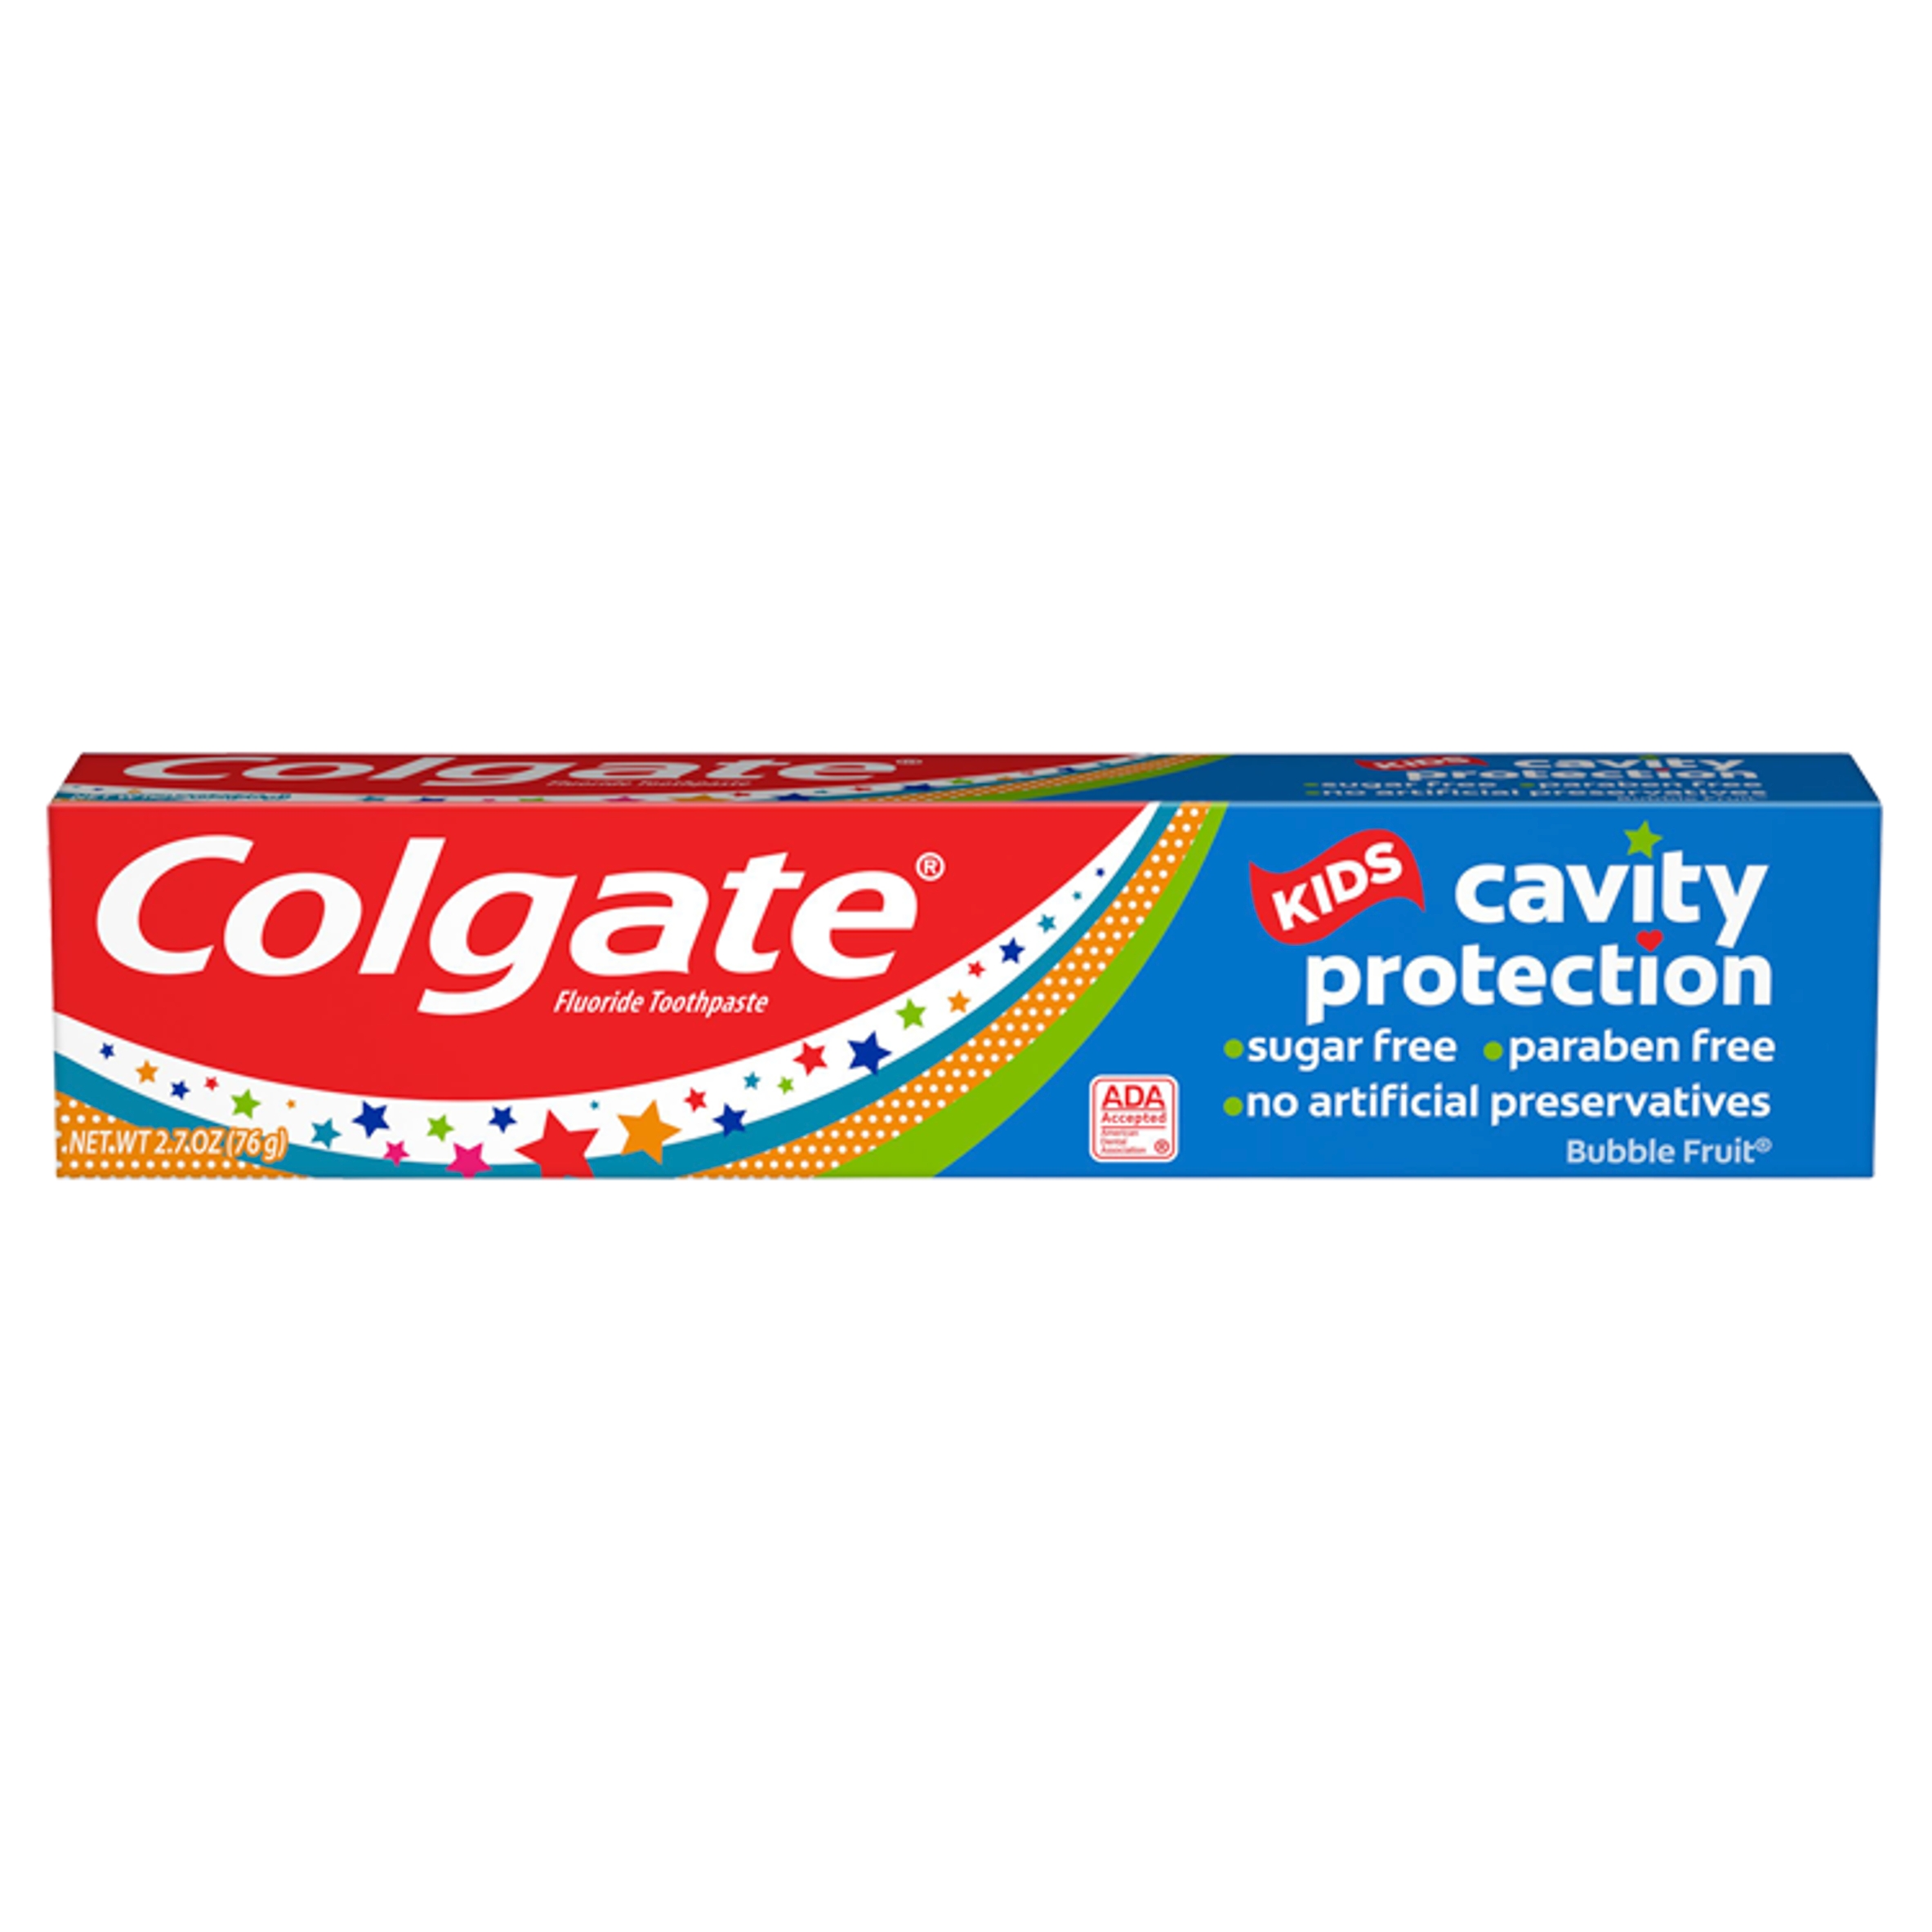 Detail Colgate Toothpaste Pictures Nomer 27